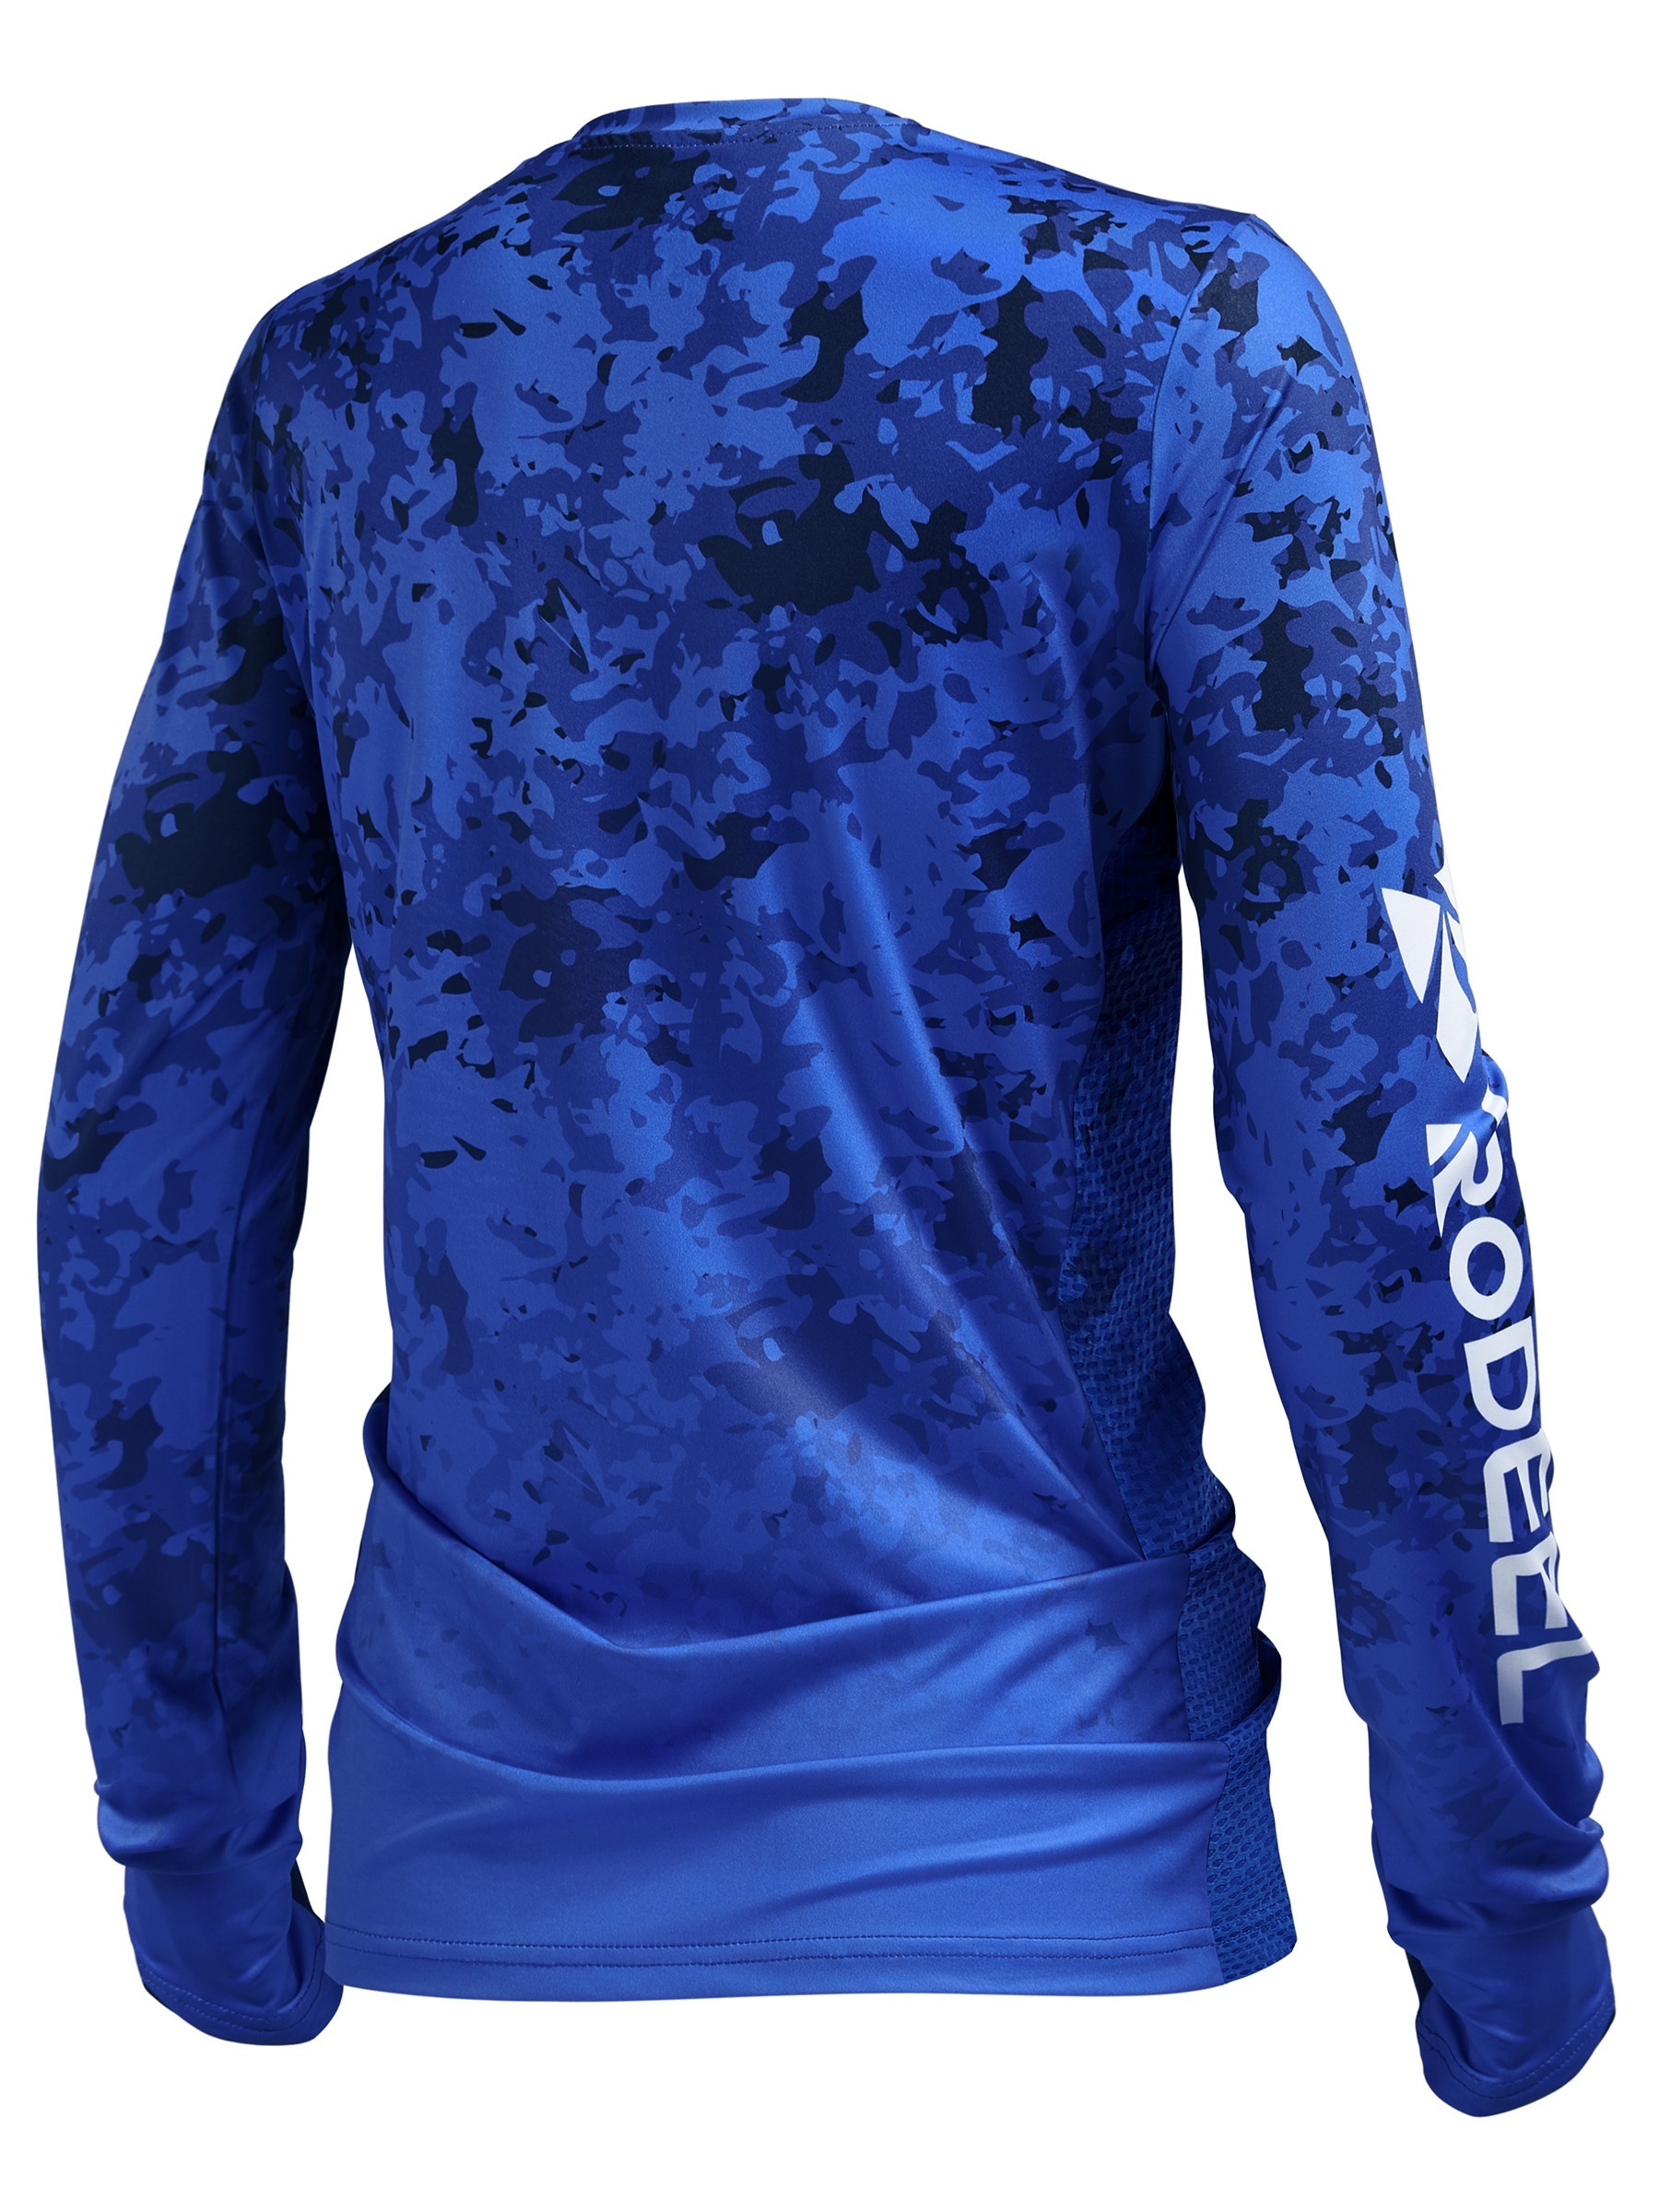 Rodeel Women's Hoodie Long Sleeve Sport Running Quick Dry Shirts Athletic Moisture Wicking Tops UPF 50 Sleeve with Thumbholes